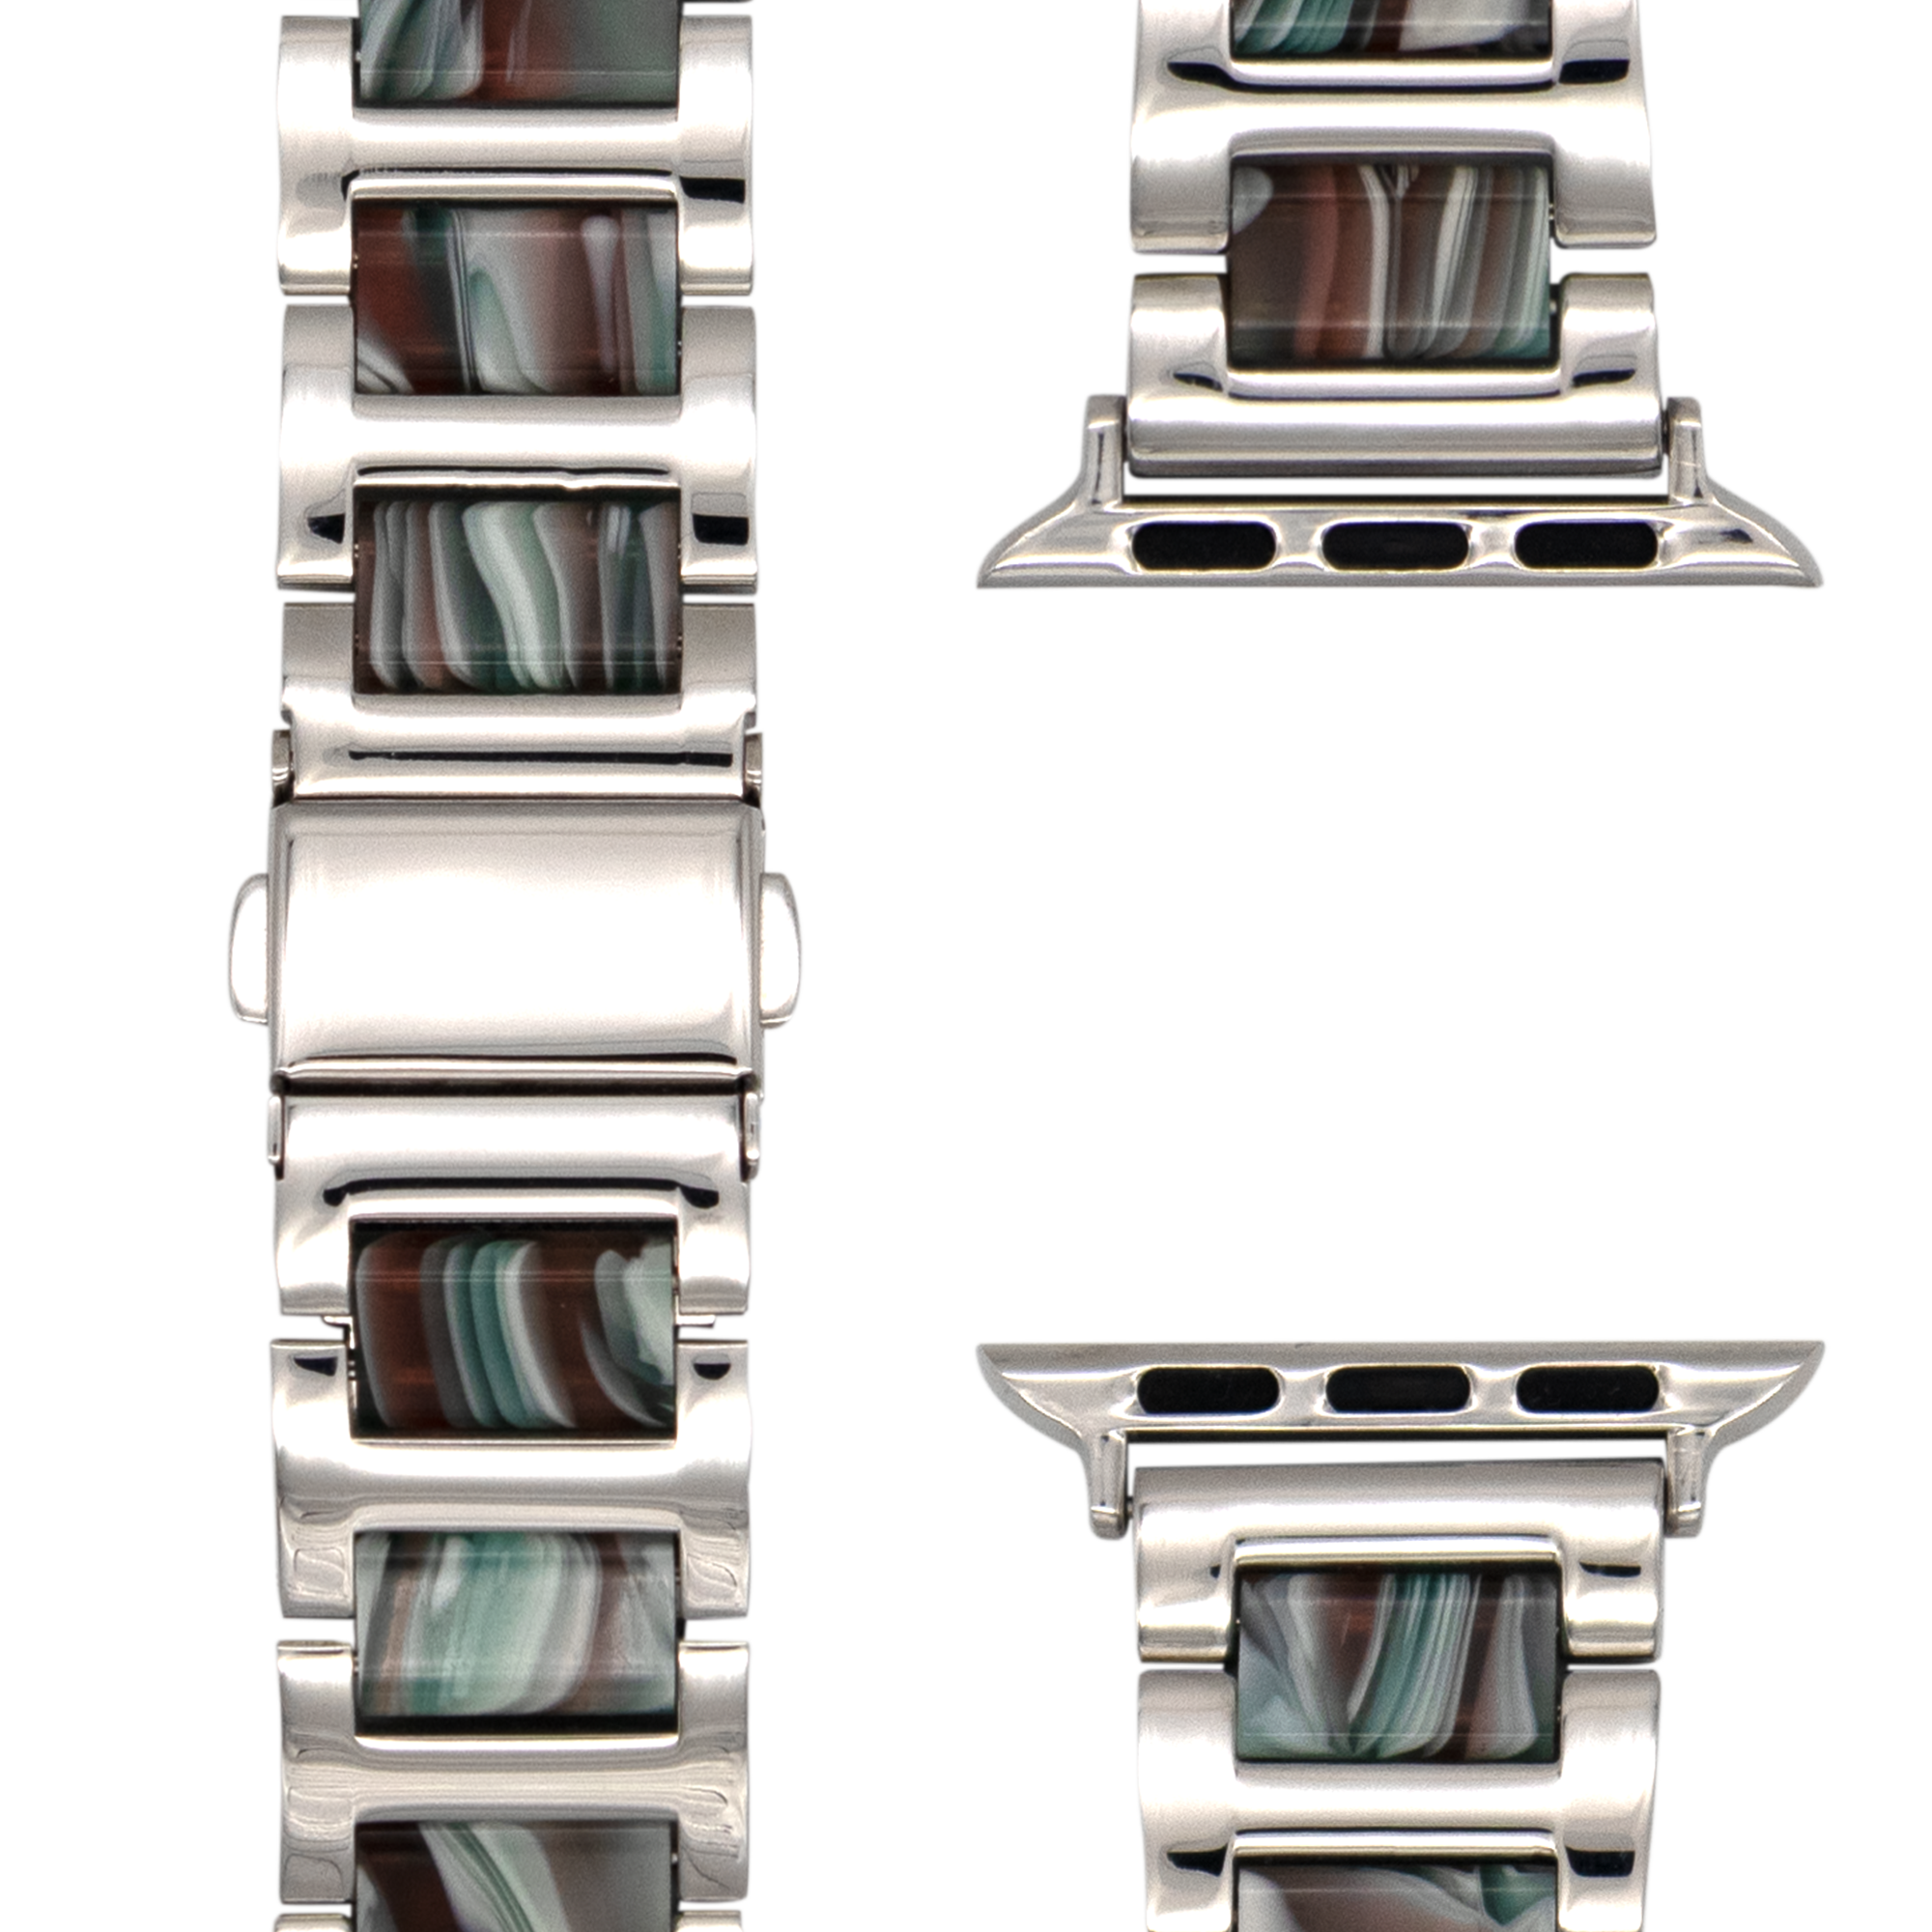 41mm, | 1 Watch 38mm Series - SE, / APFELBAND \